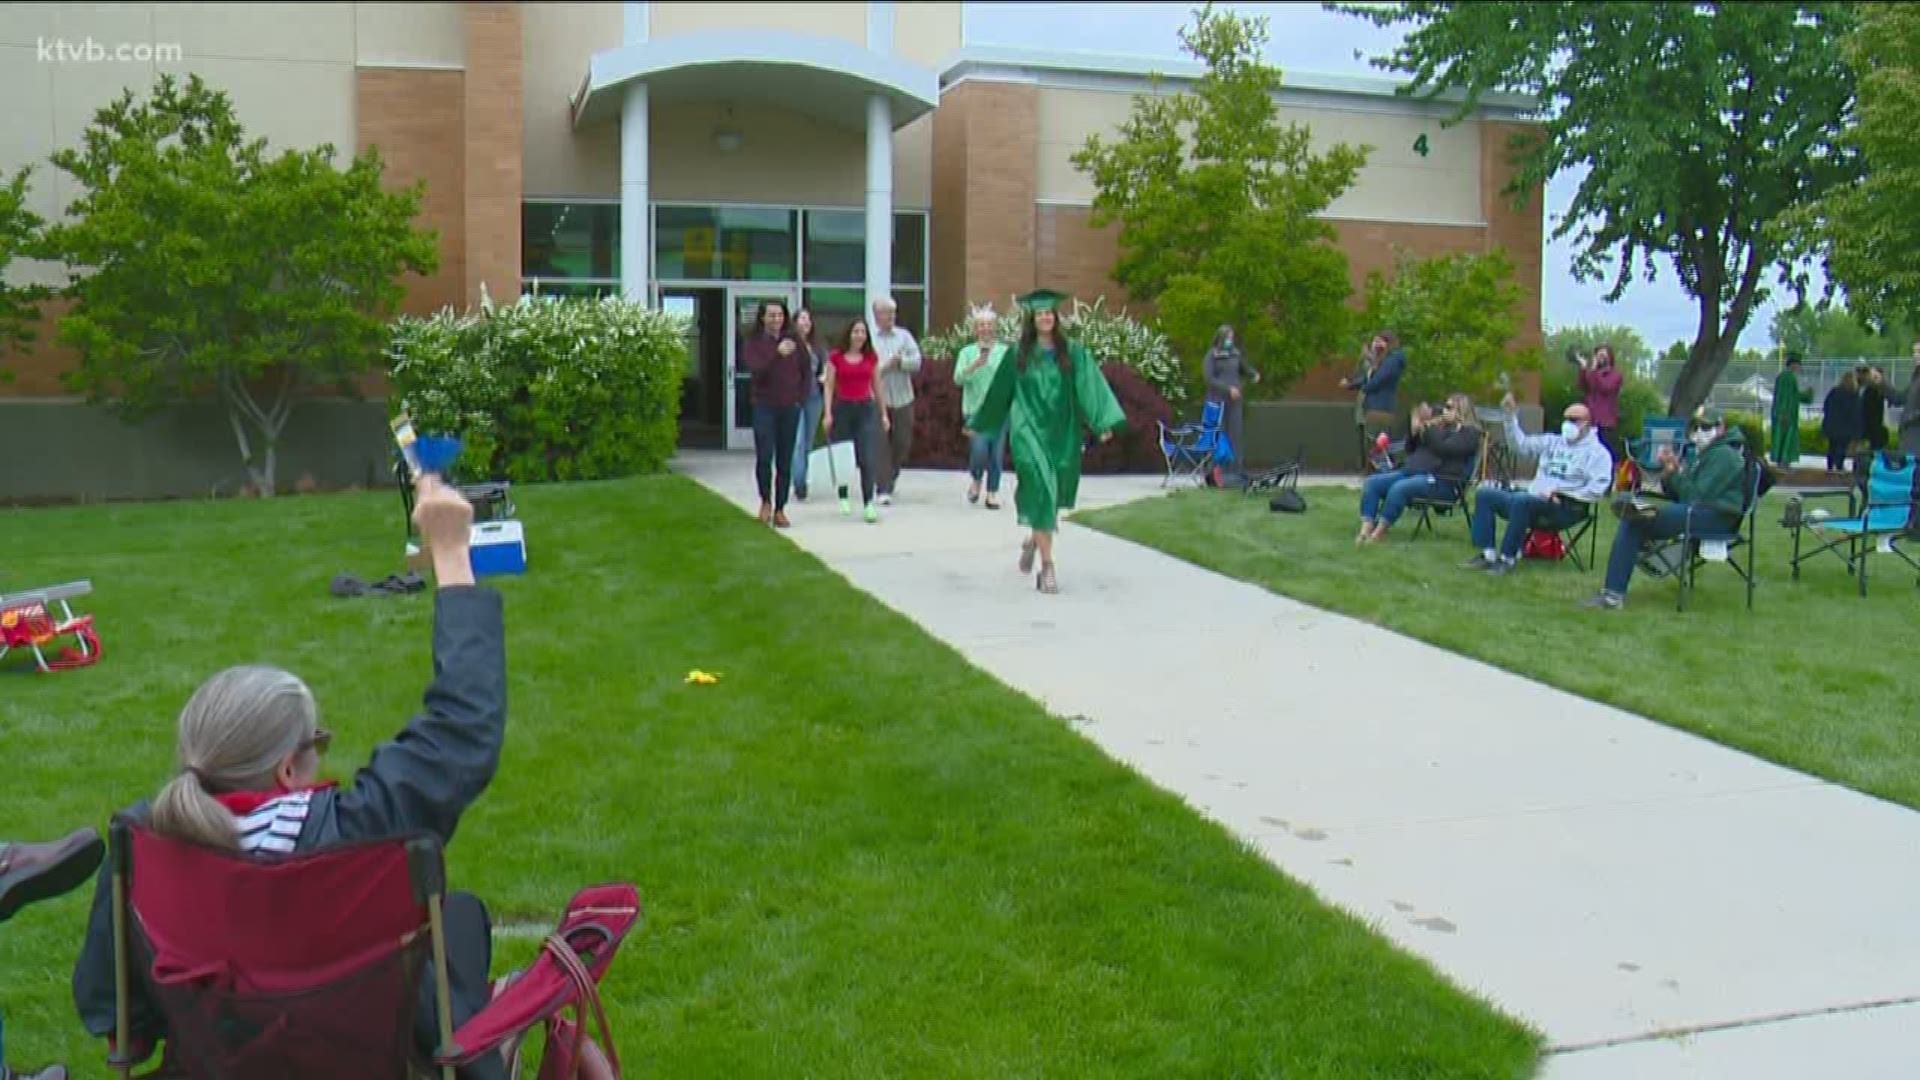 Many schools in the Boise School District have celebrated the Class of 2020 in some unconventional, yet creative ways.